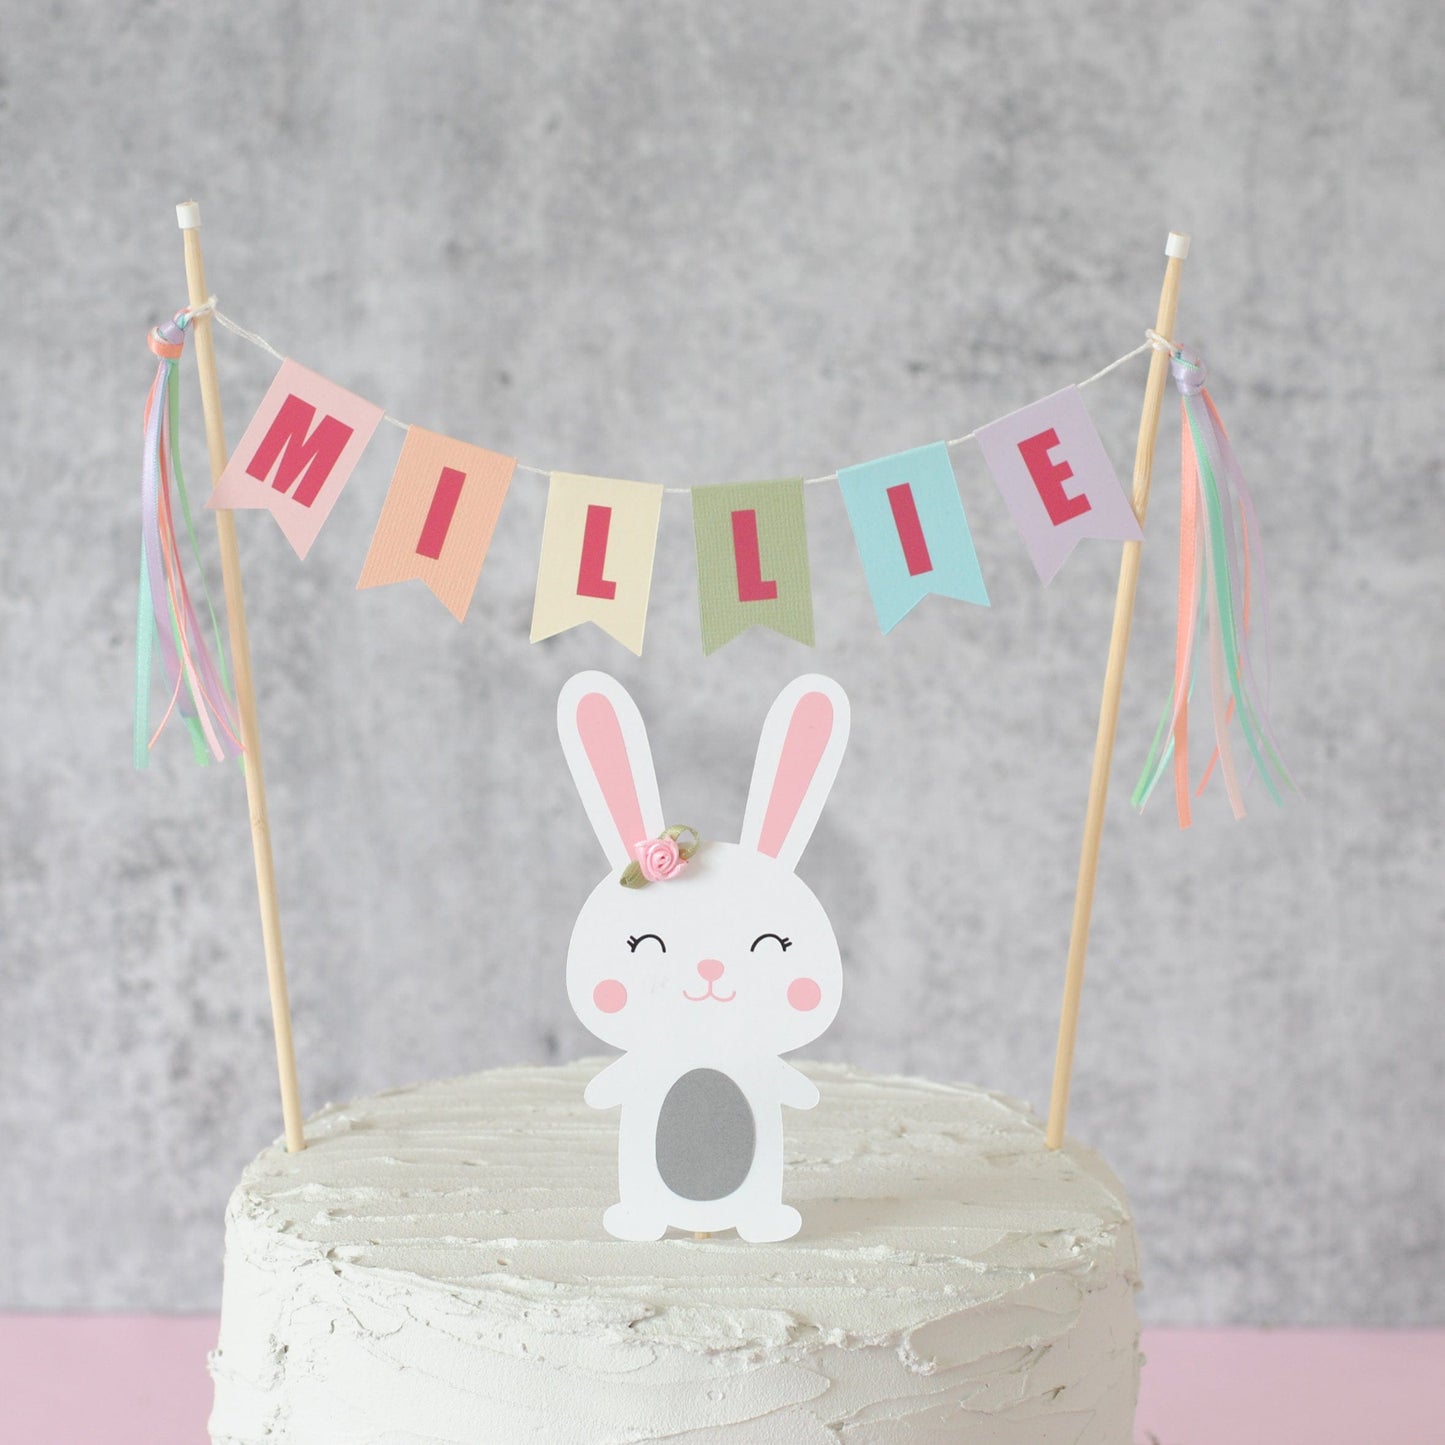 Bunny theme Cake 1 Online | Online Cake Delivery | Order Cake Online |  Infinity Cakes. Infinity Cakes -To Cakes & Beyond